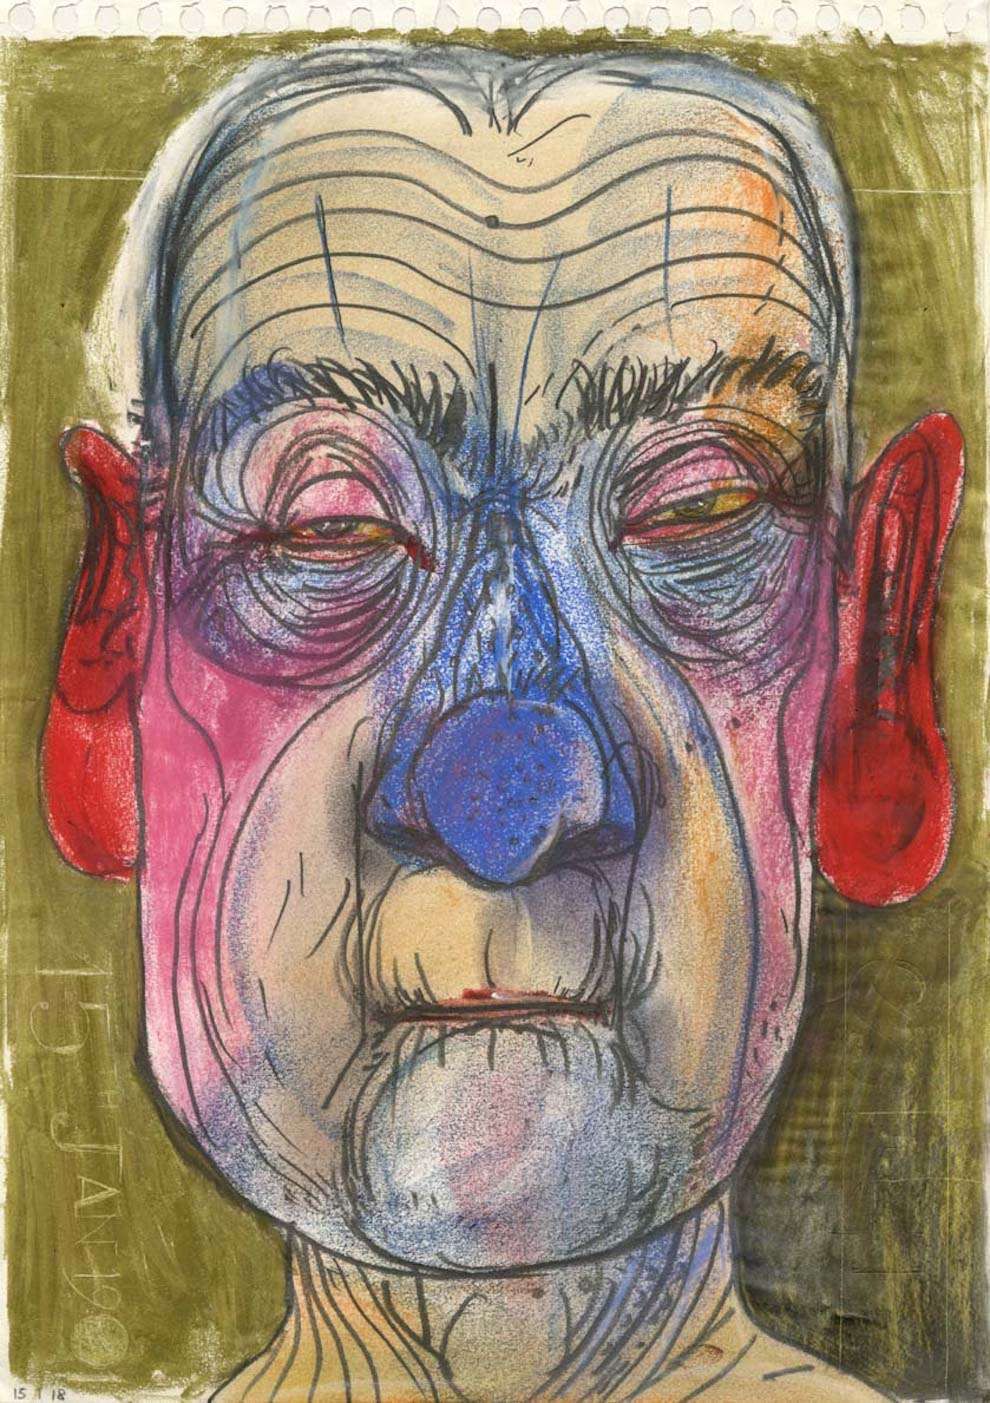 David Hughes, Oil pastel and pen portrait of an old sad man with red ears